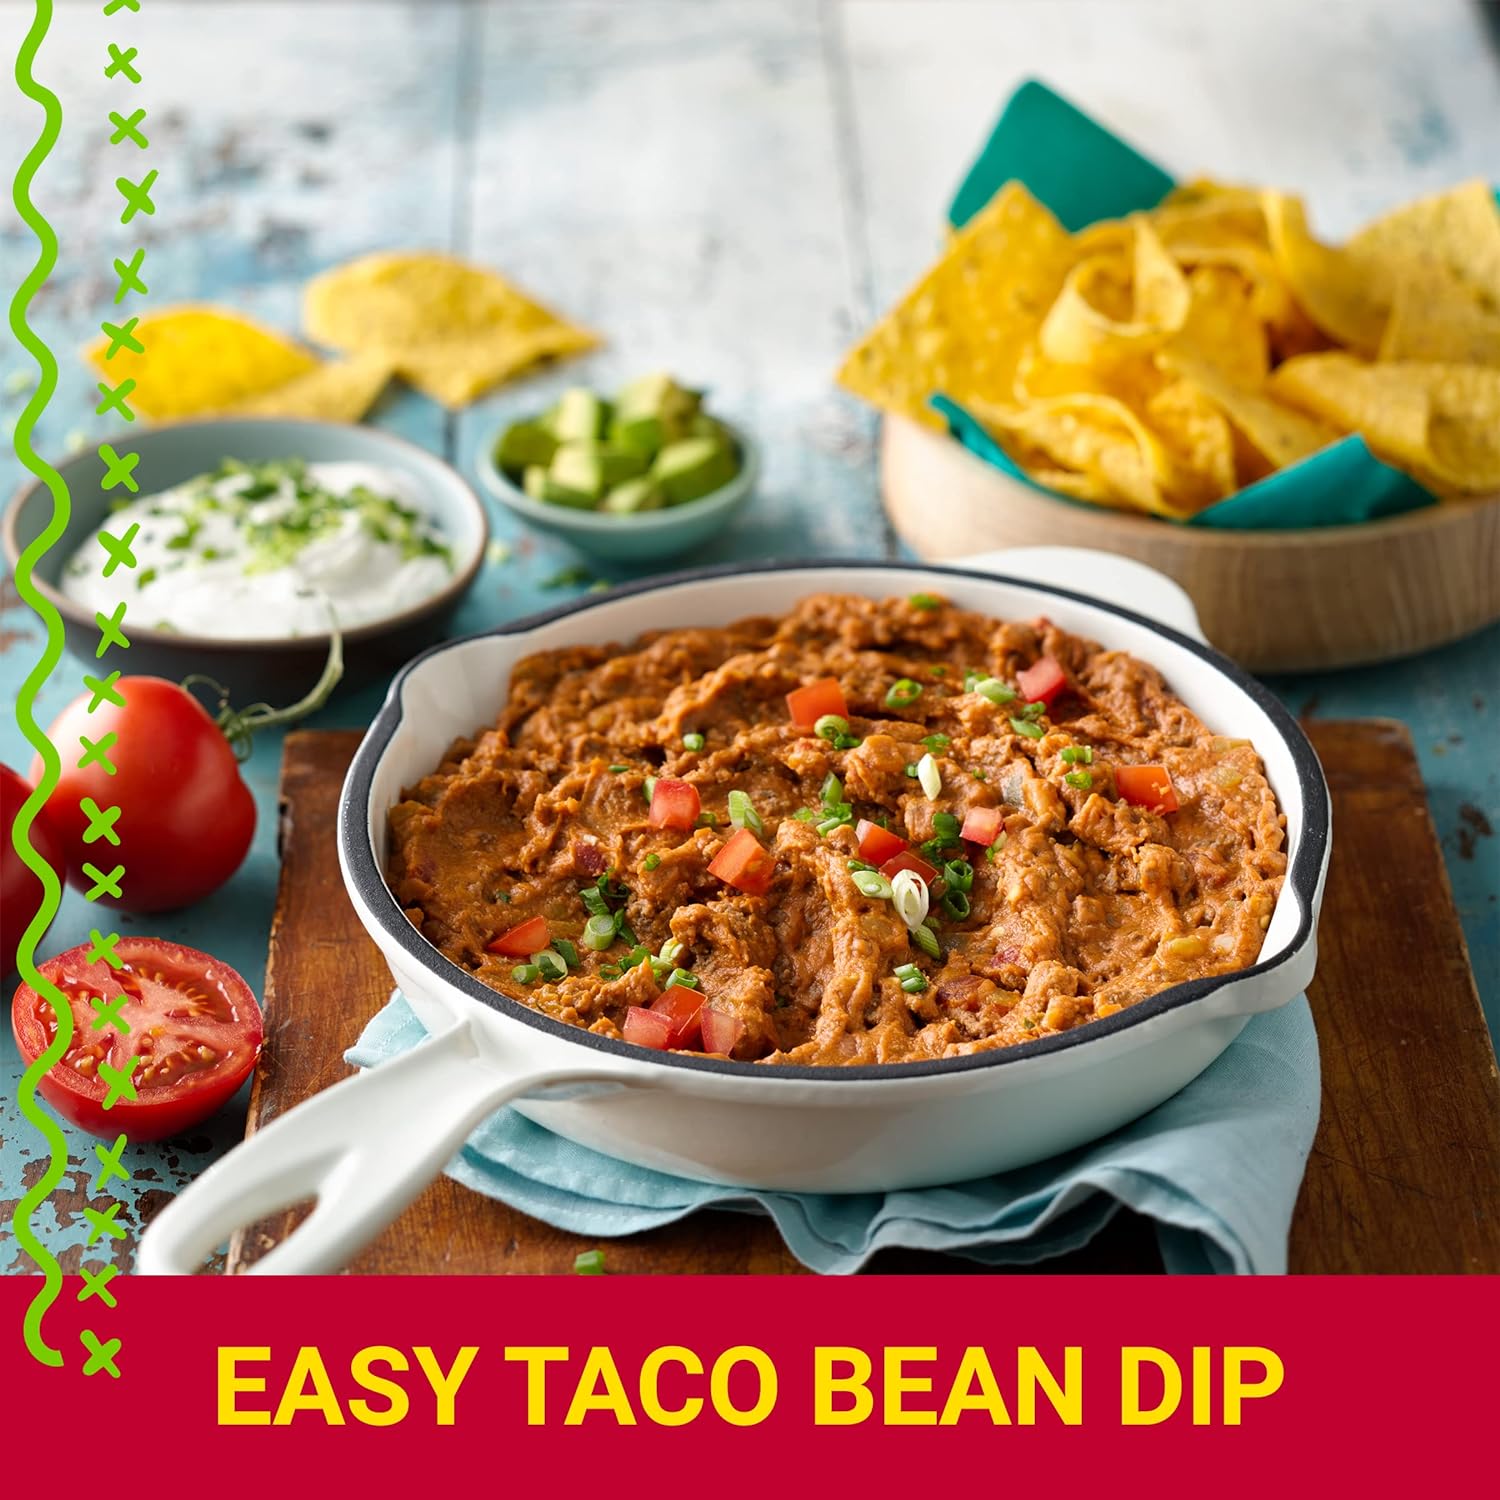 Old El Paso Traditional Canned Refried Beans, 16 oz. (Pack of 12) : Grocery & Gourmet Food